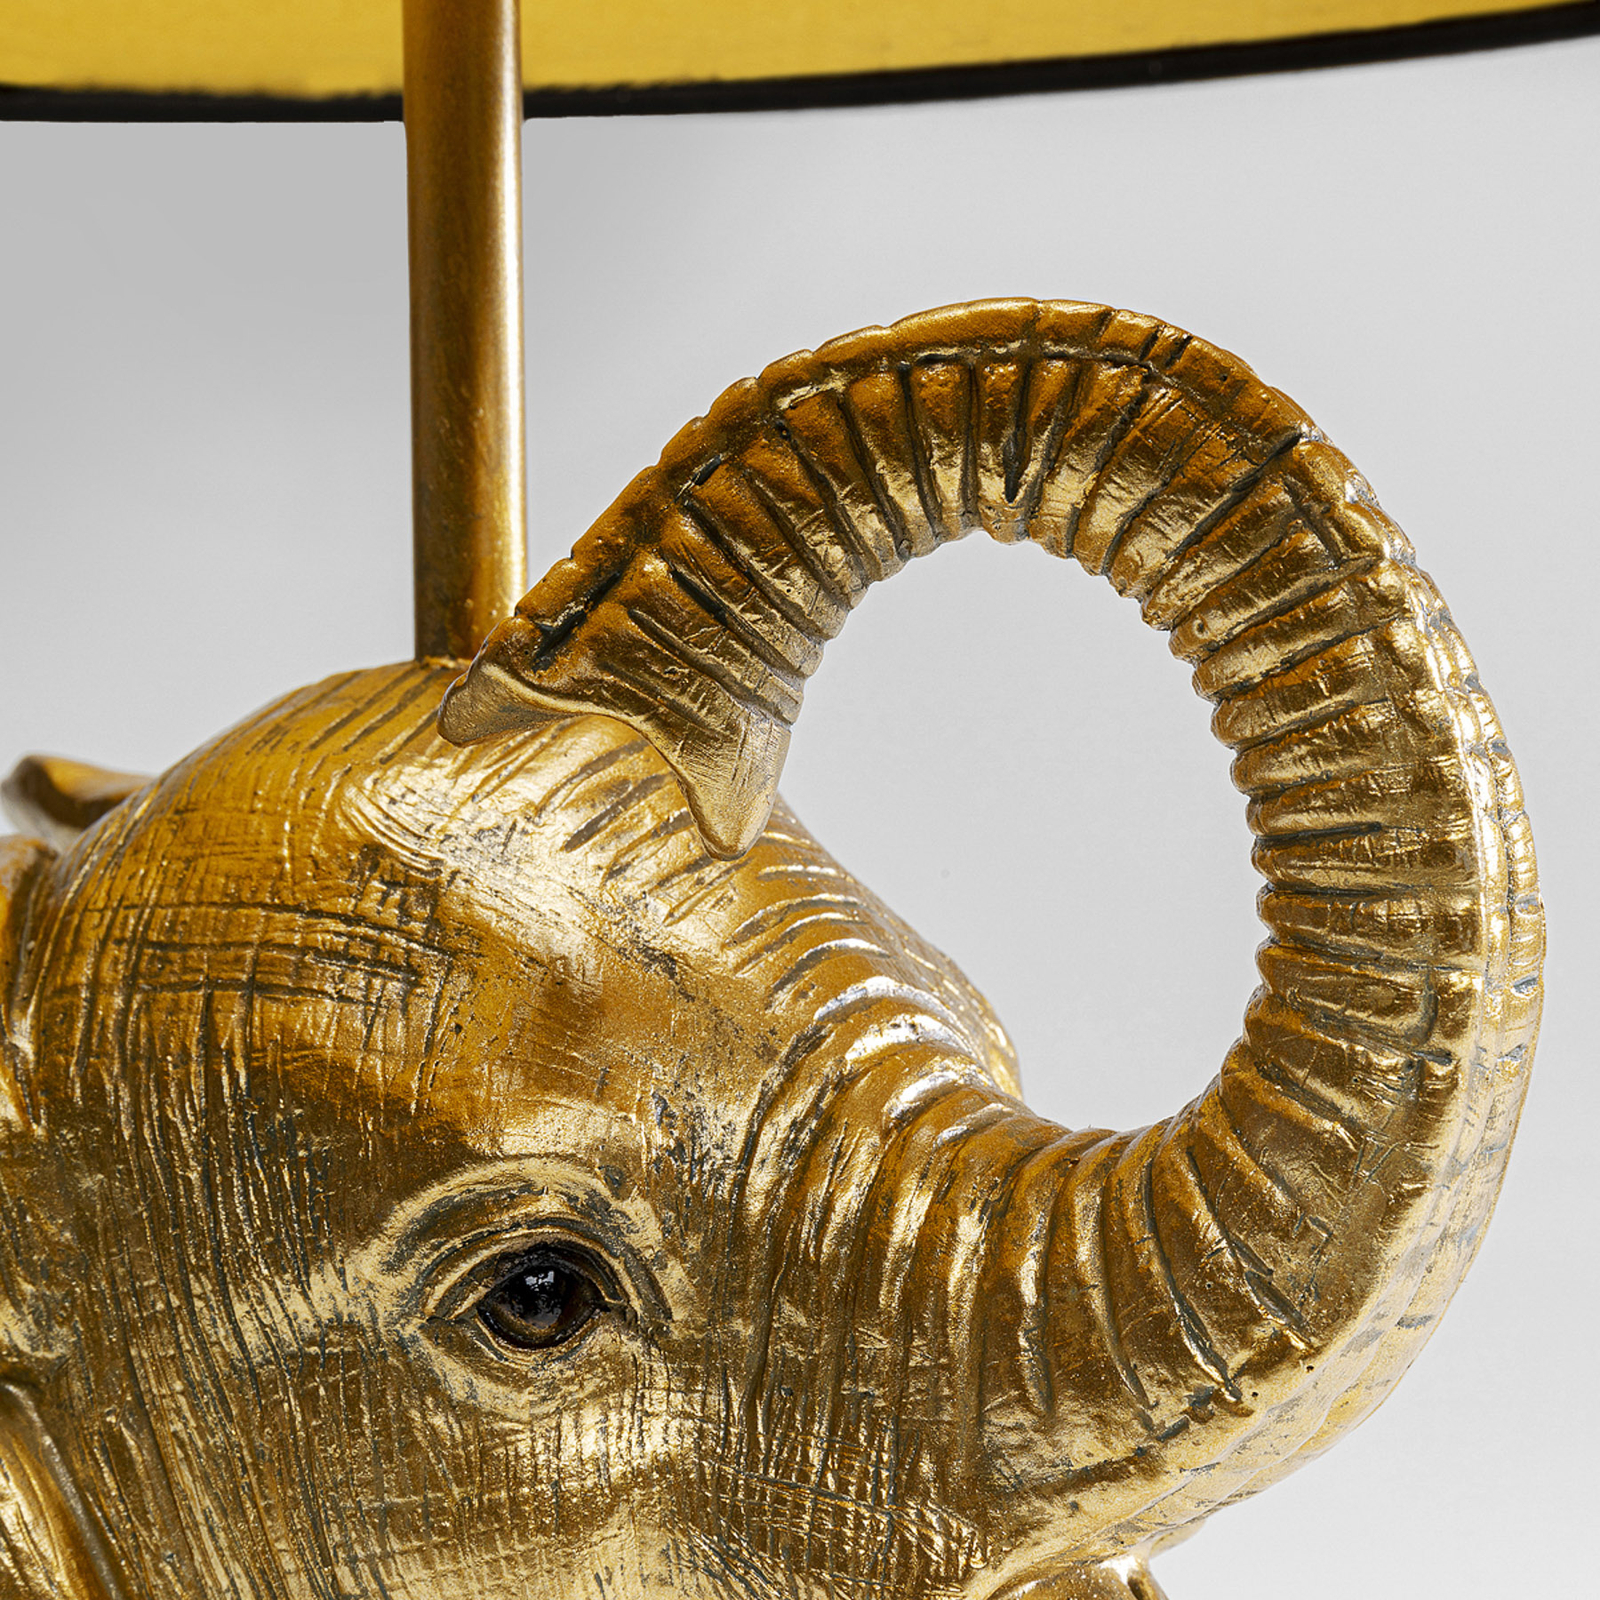 KARE Happy Elephant table lamp with a lampshade